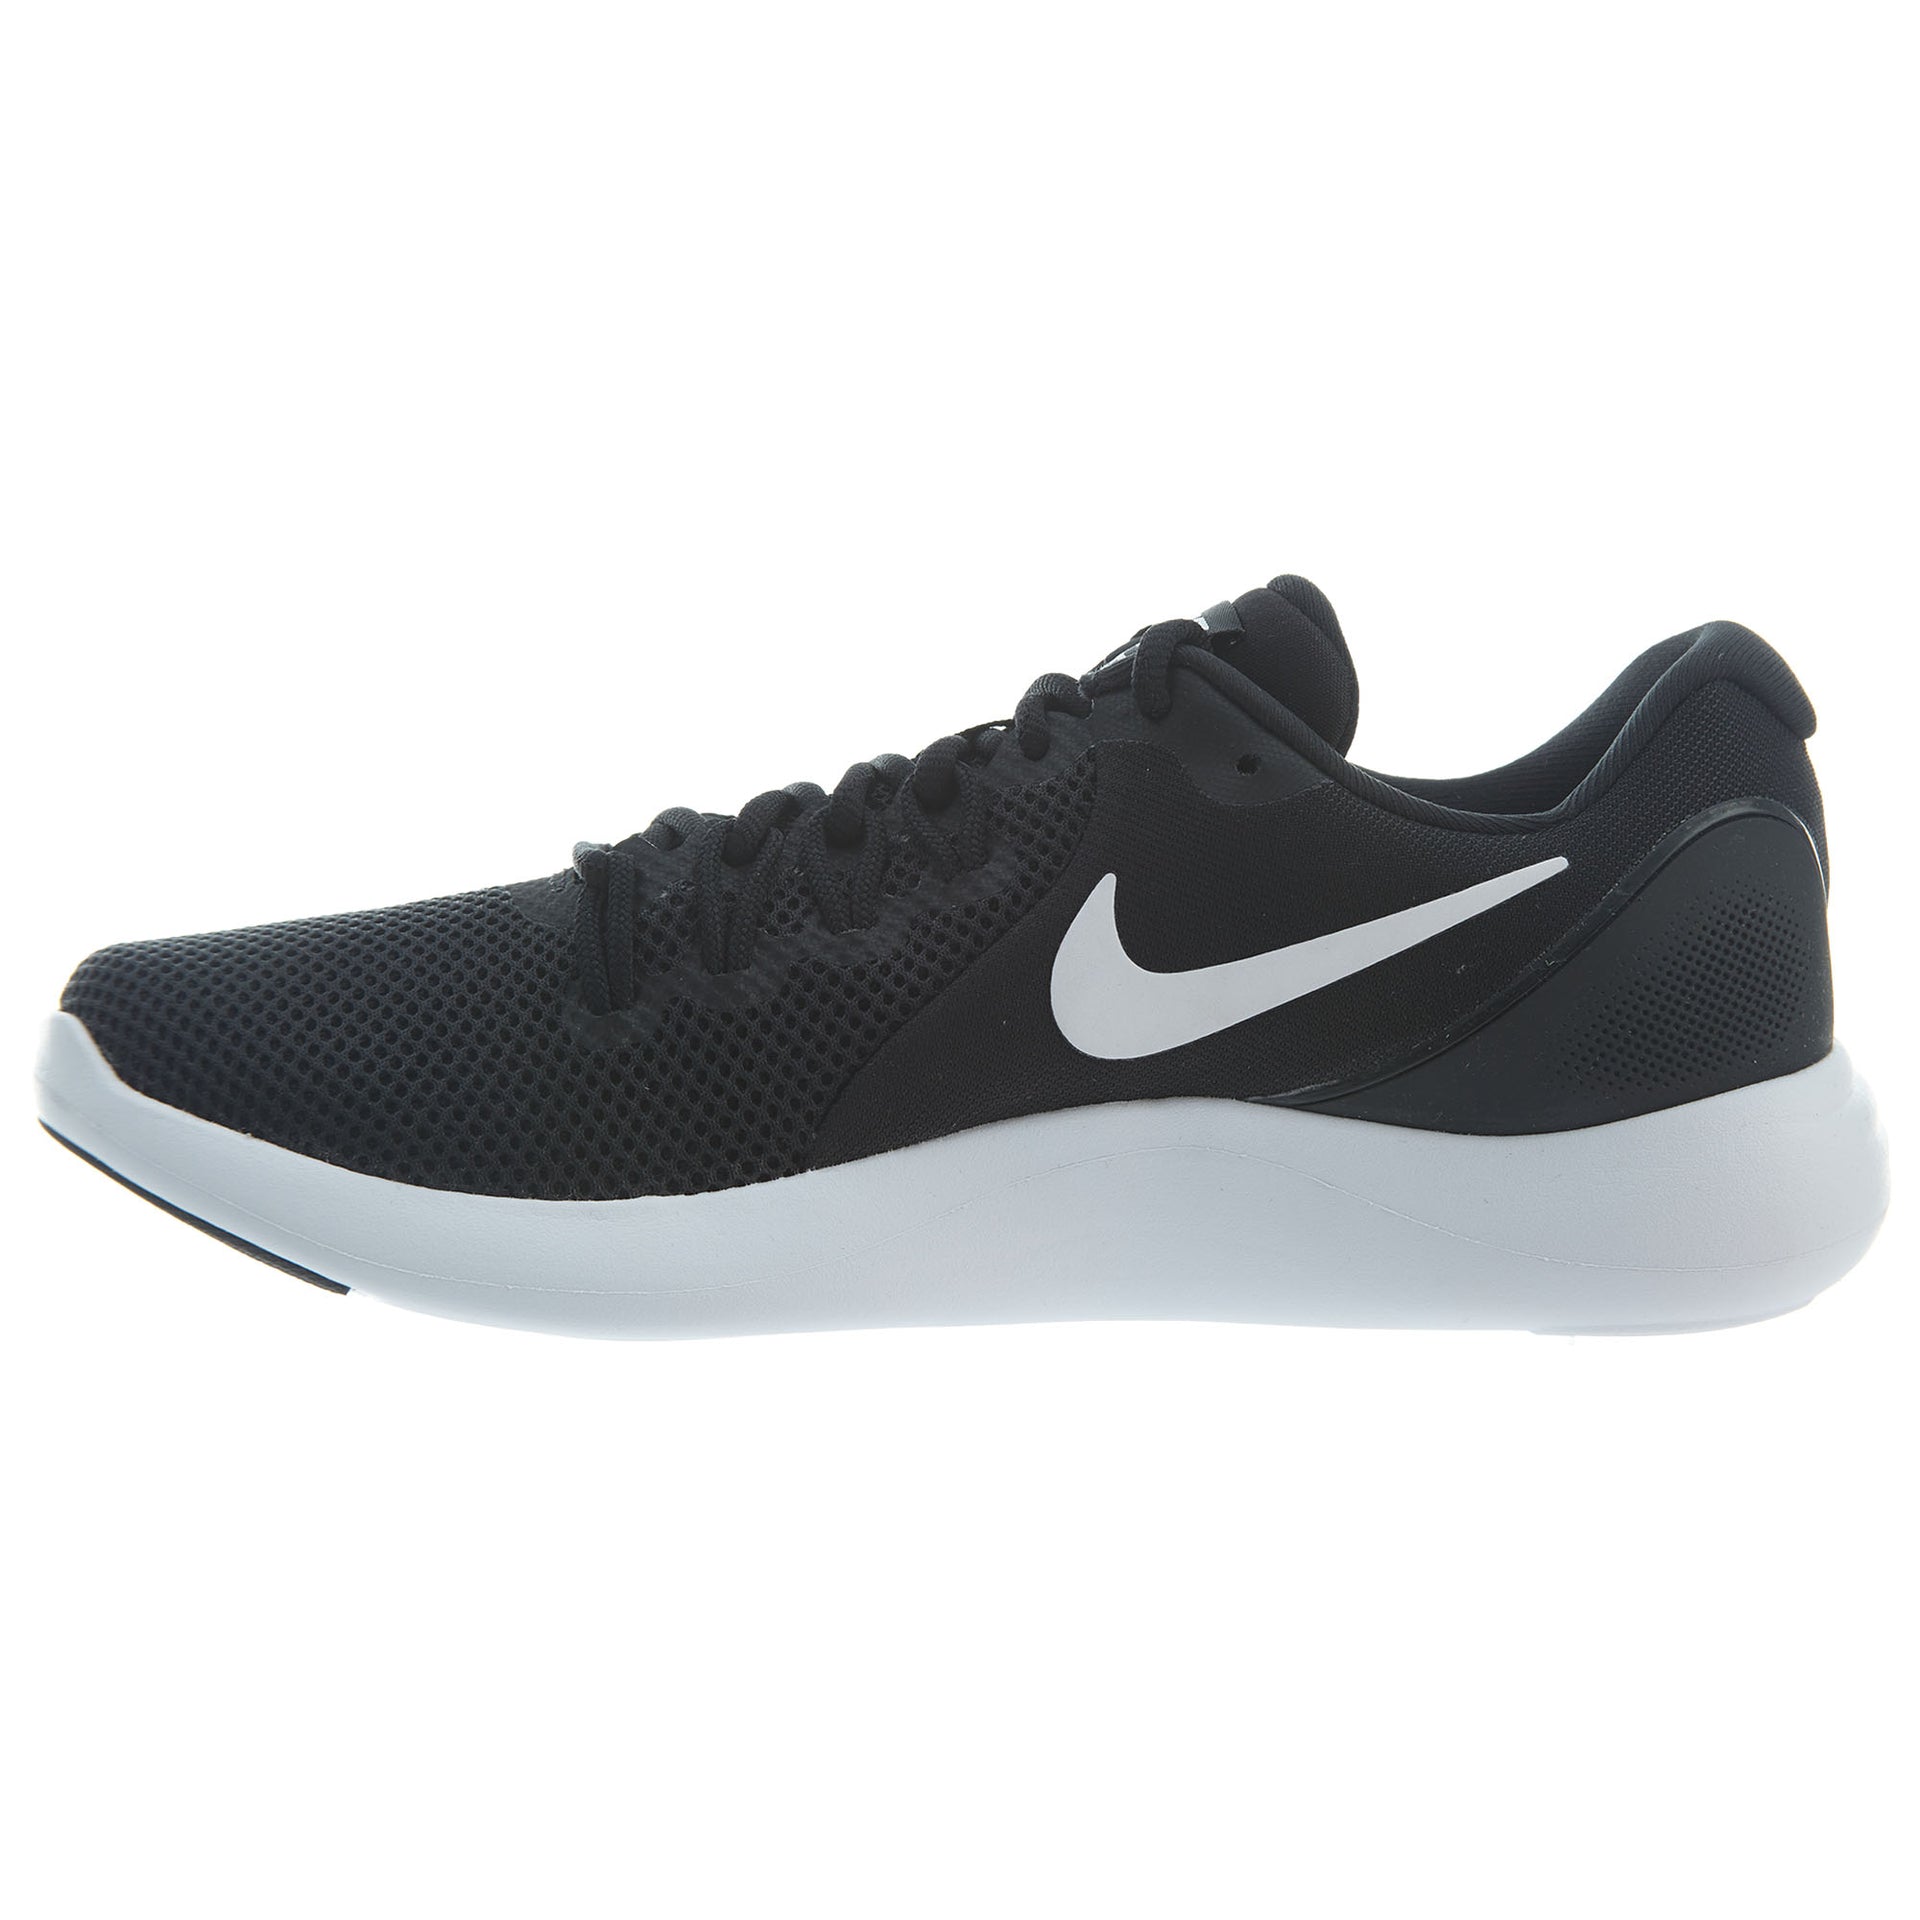 Nike Lunar Apparent Running Shoes Mens Style :908987